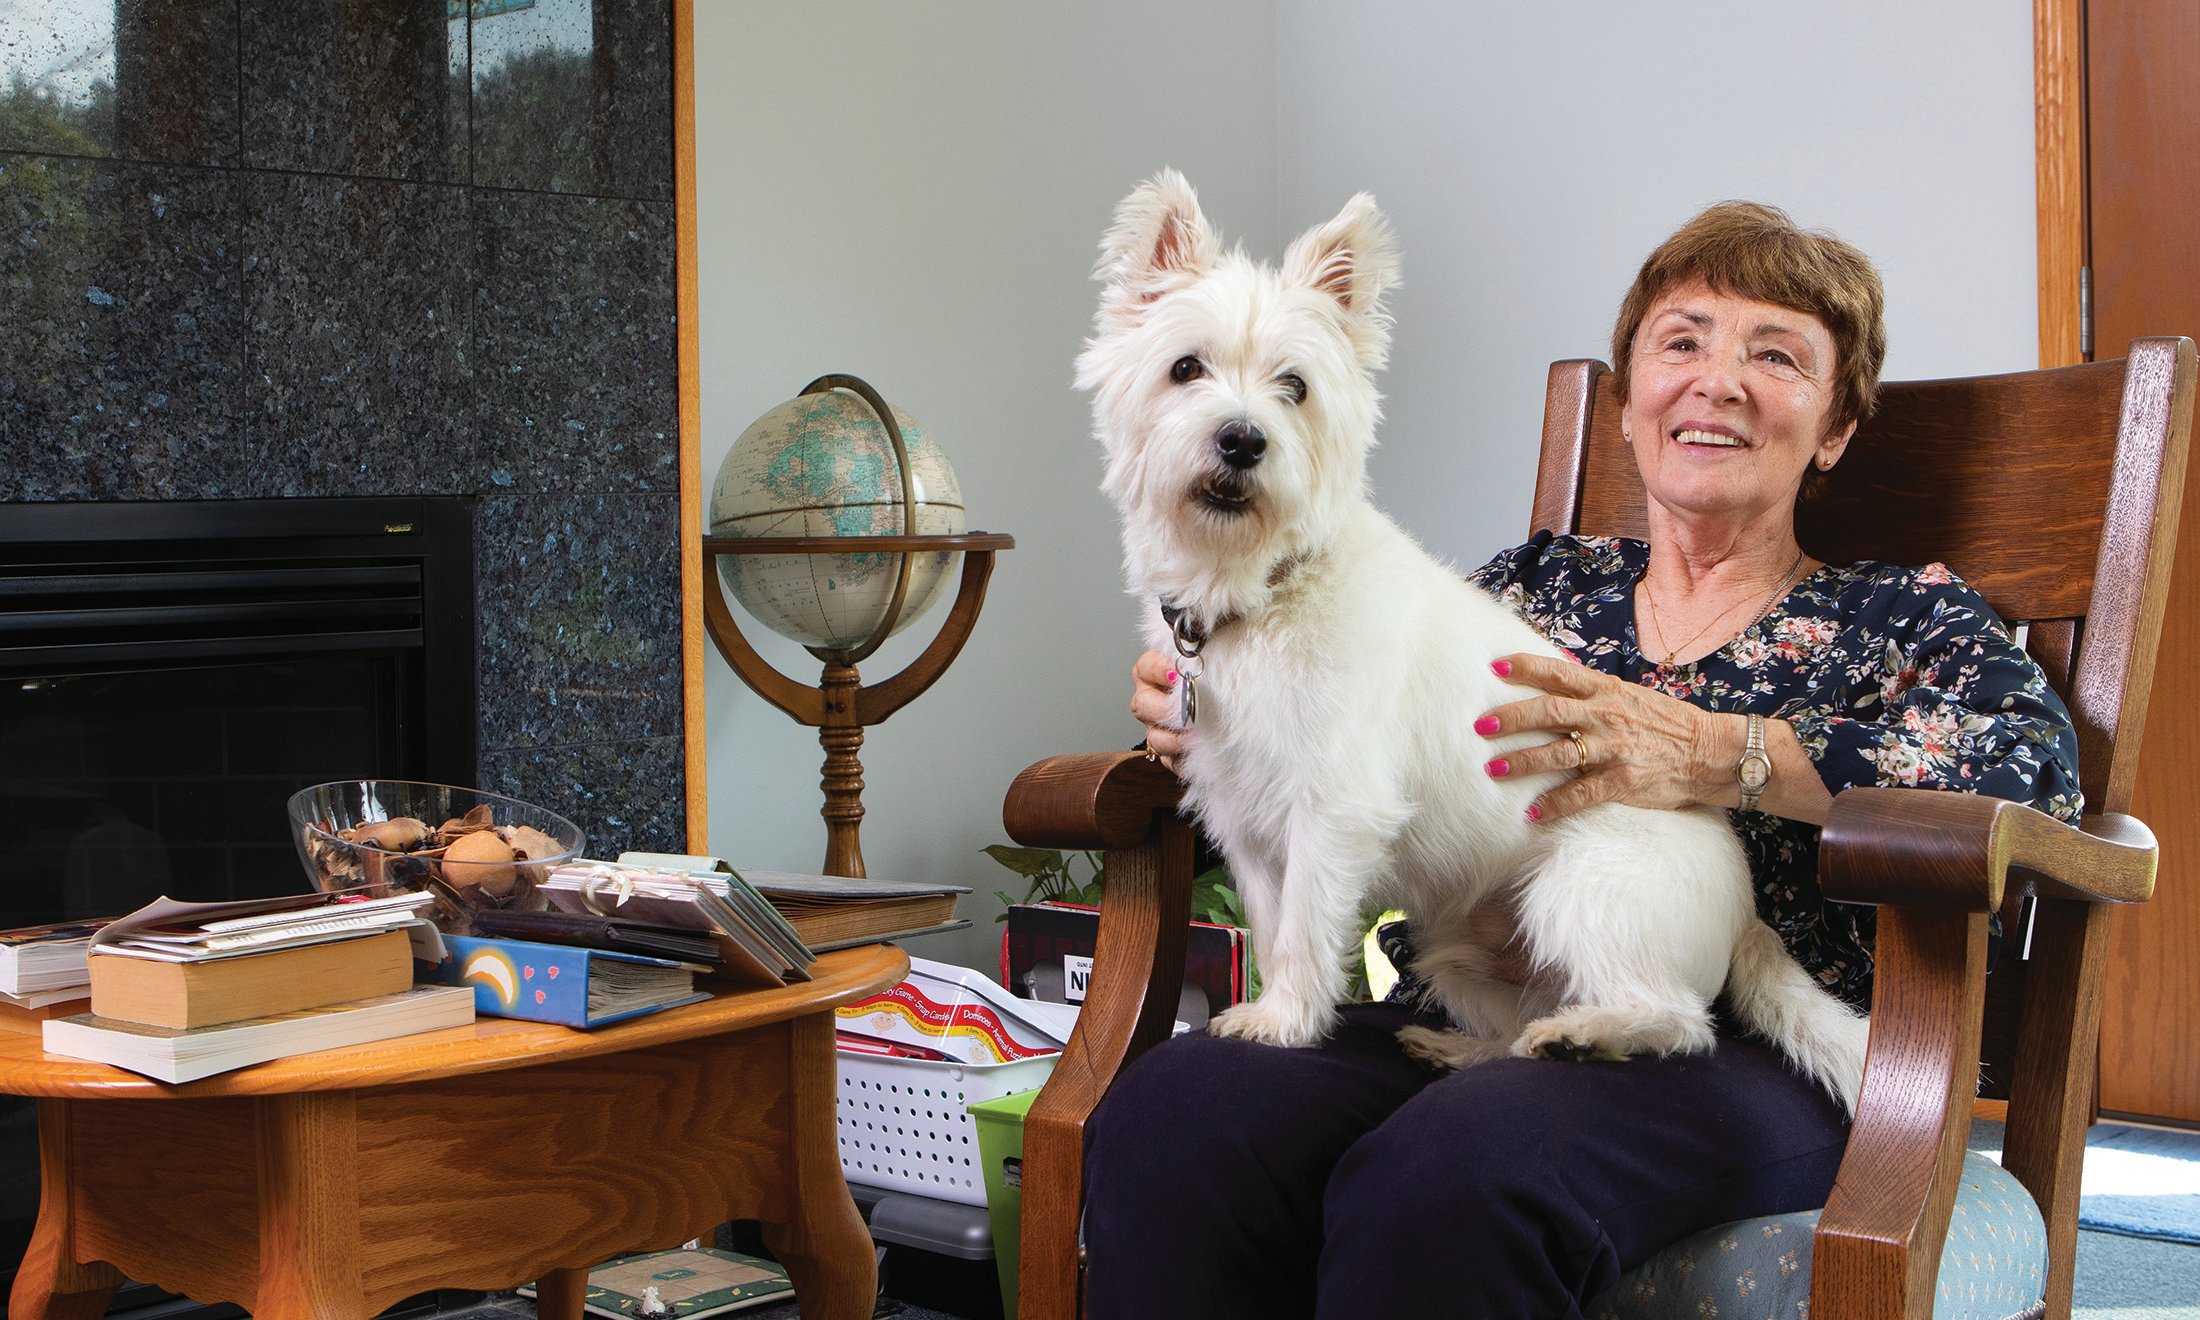 A woman in a chair with a white dog sitting on her lap.